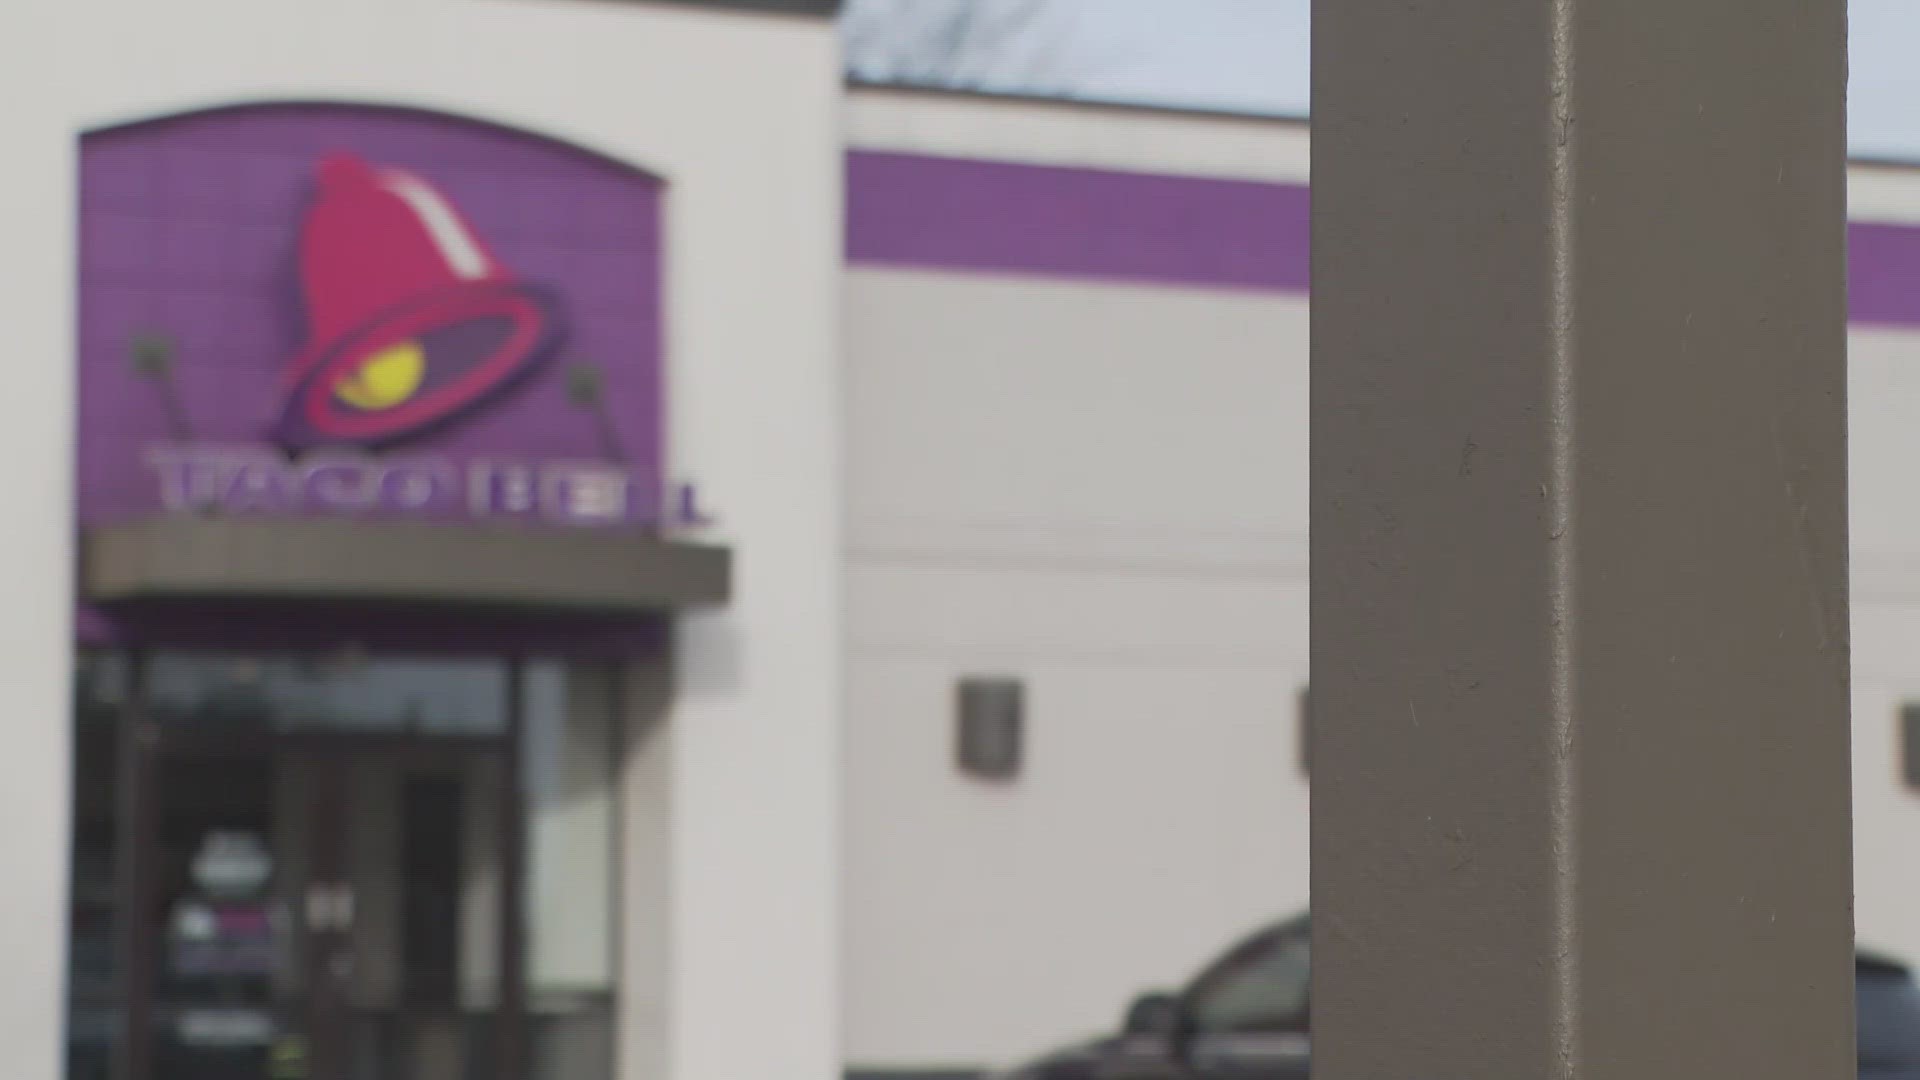 Kentucky State Police is investigating after a Bardstown police officer fired shots inside a Taco Bell last night.